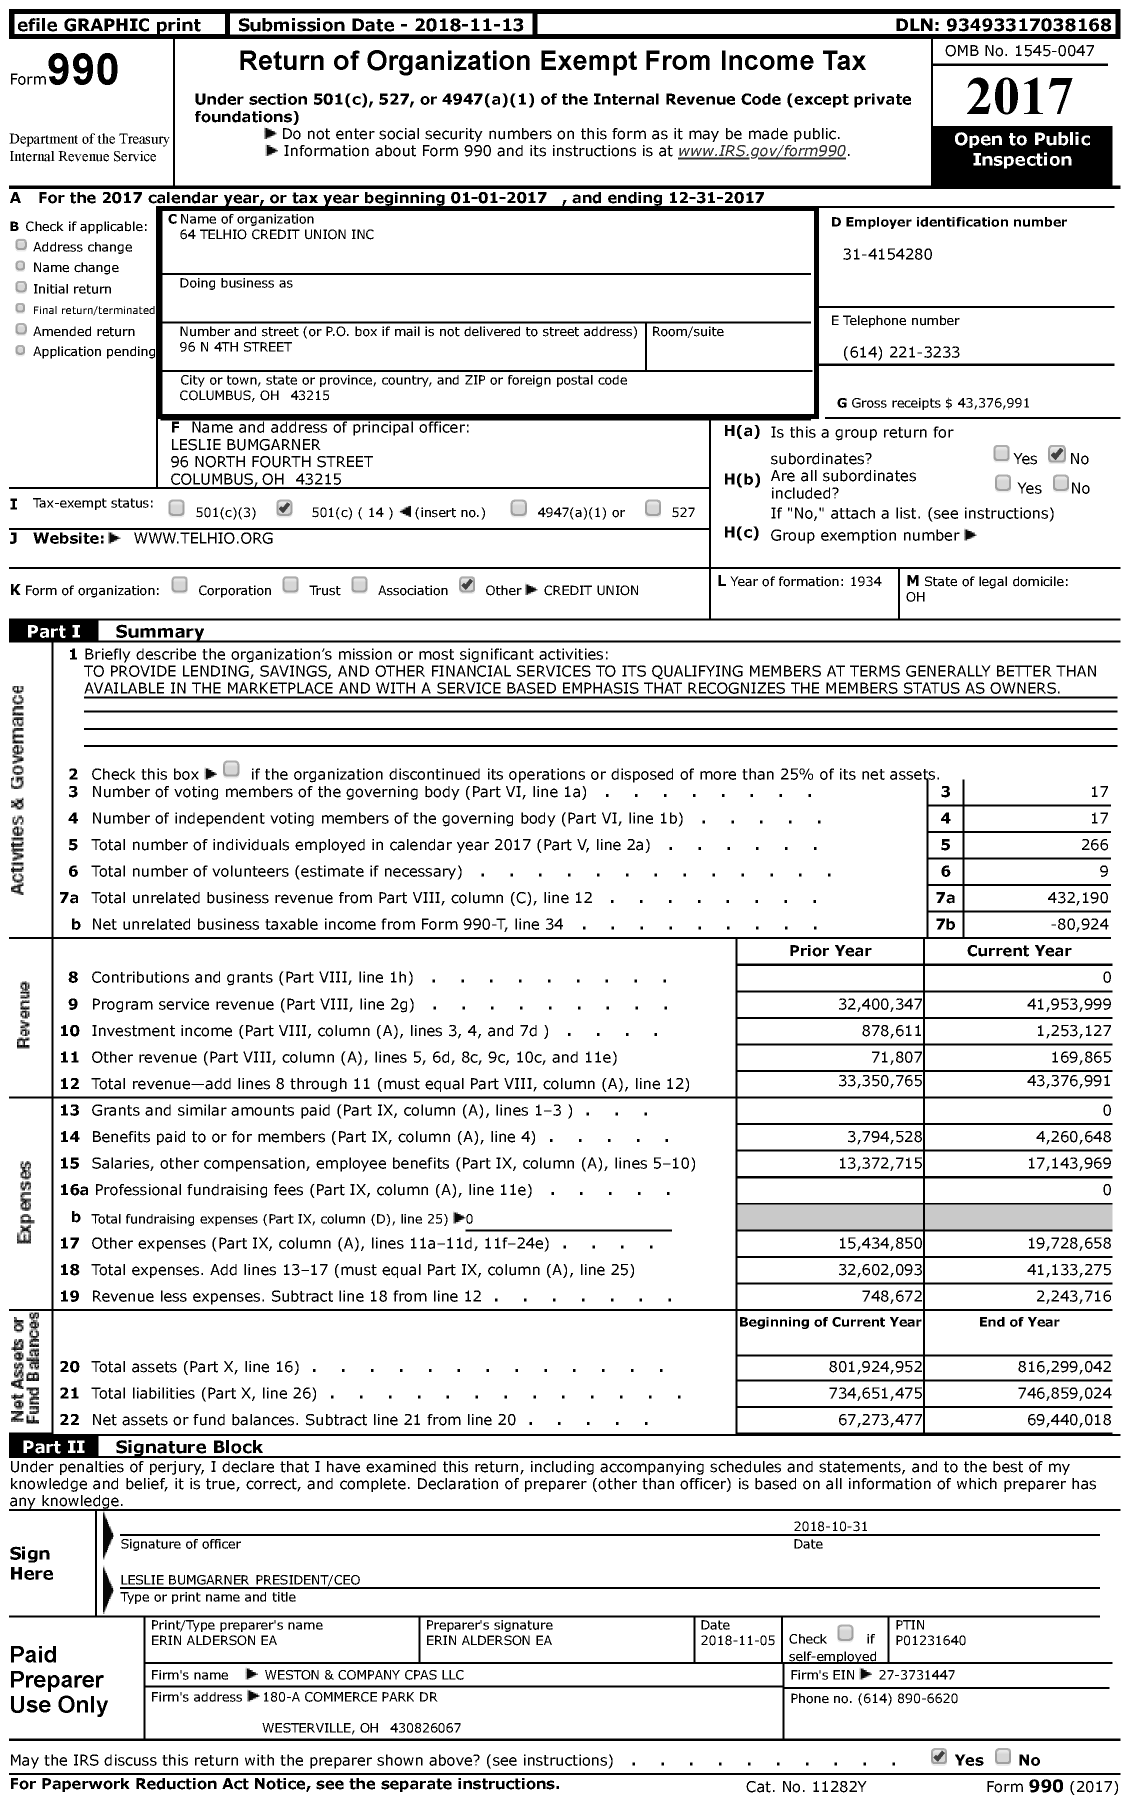 Image of first page of 2017 Form 990 for Telhio Credit Union (TCU)